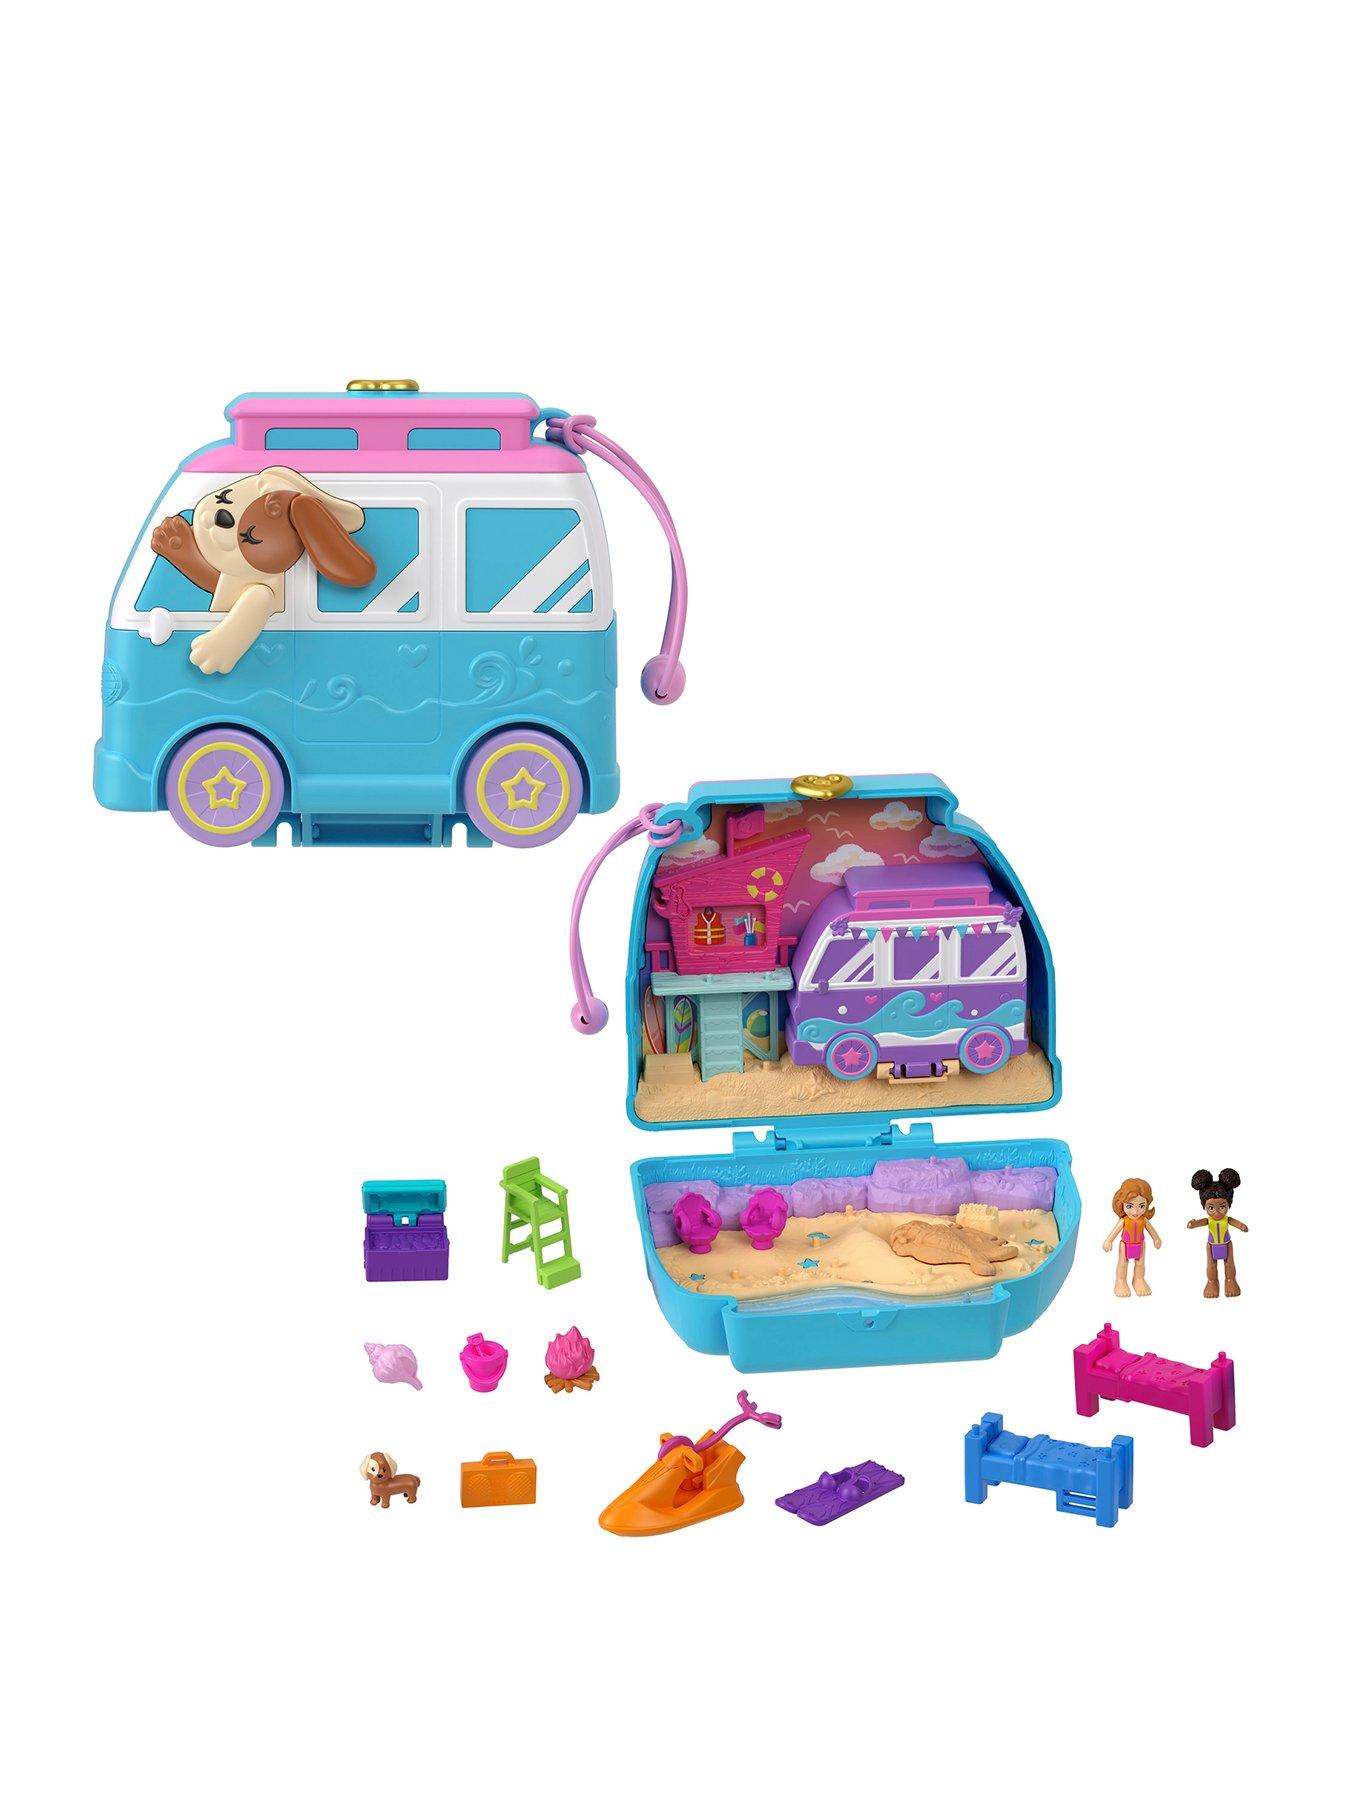 Polly Pocket Dolls & Accessories, 2-In-1 Travel Toy, Koala Purse Playset  with 2 Micro Dolls, 1 Toy Car and 5 Animals